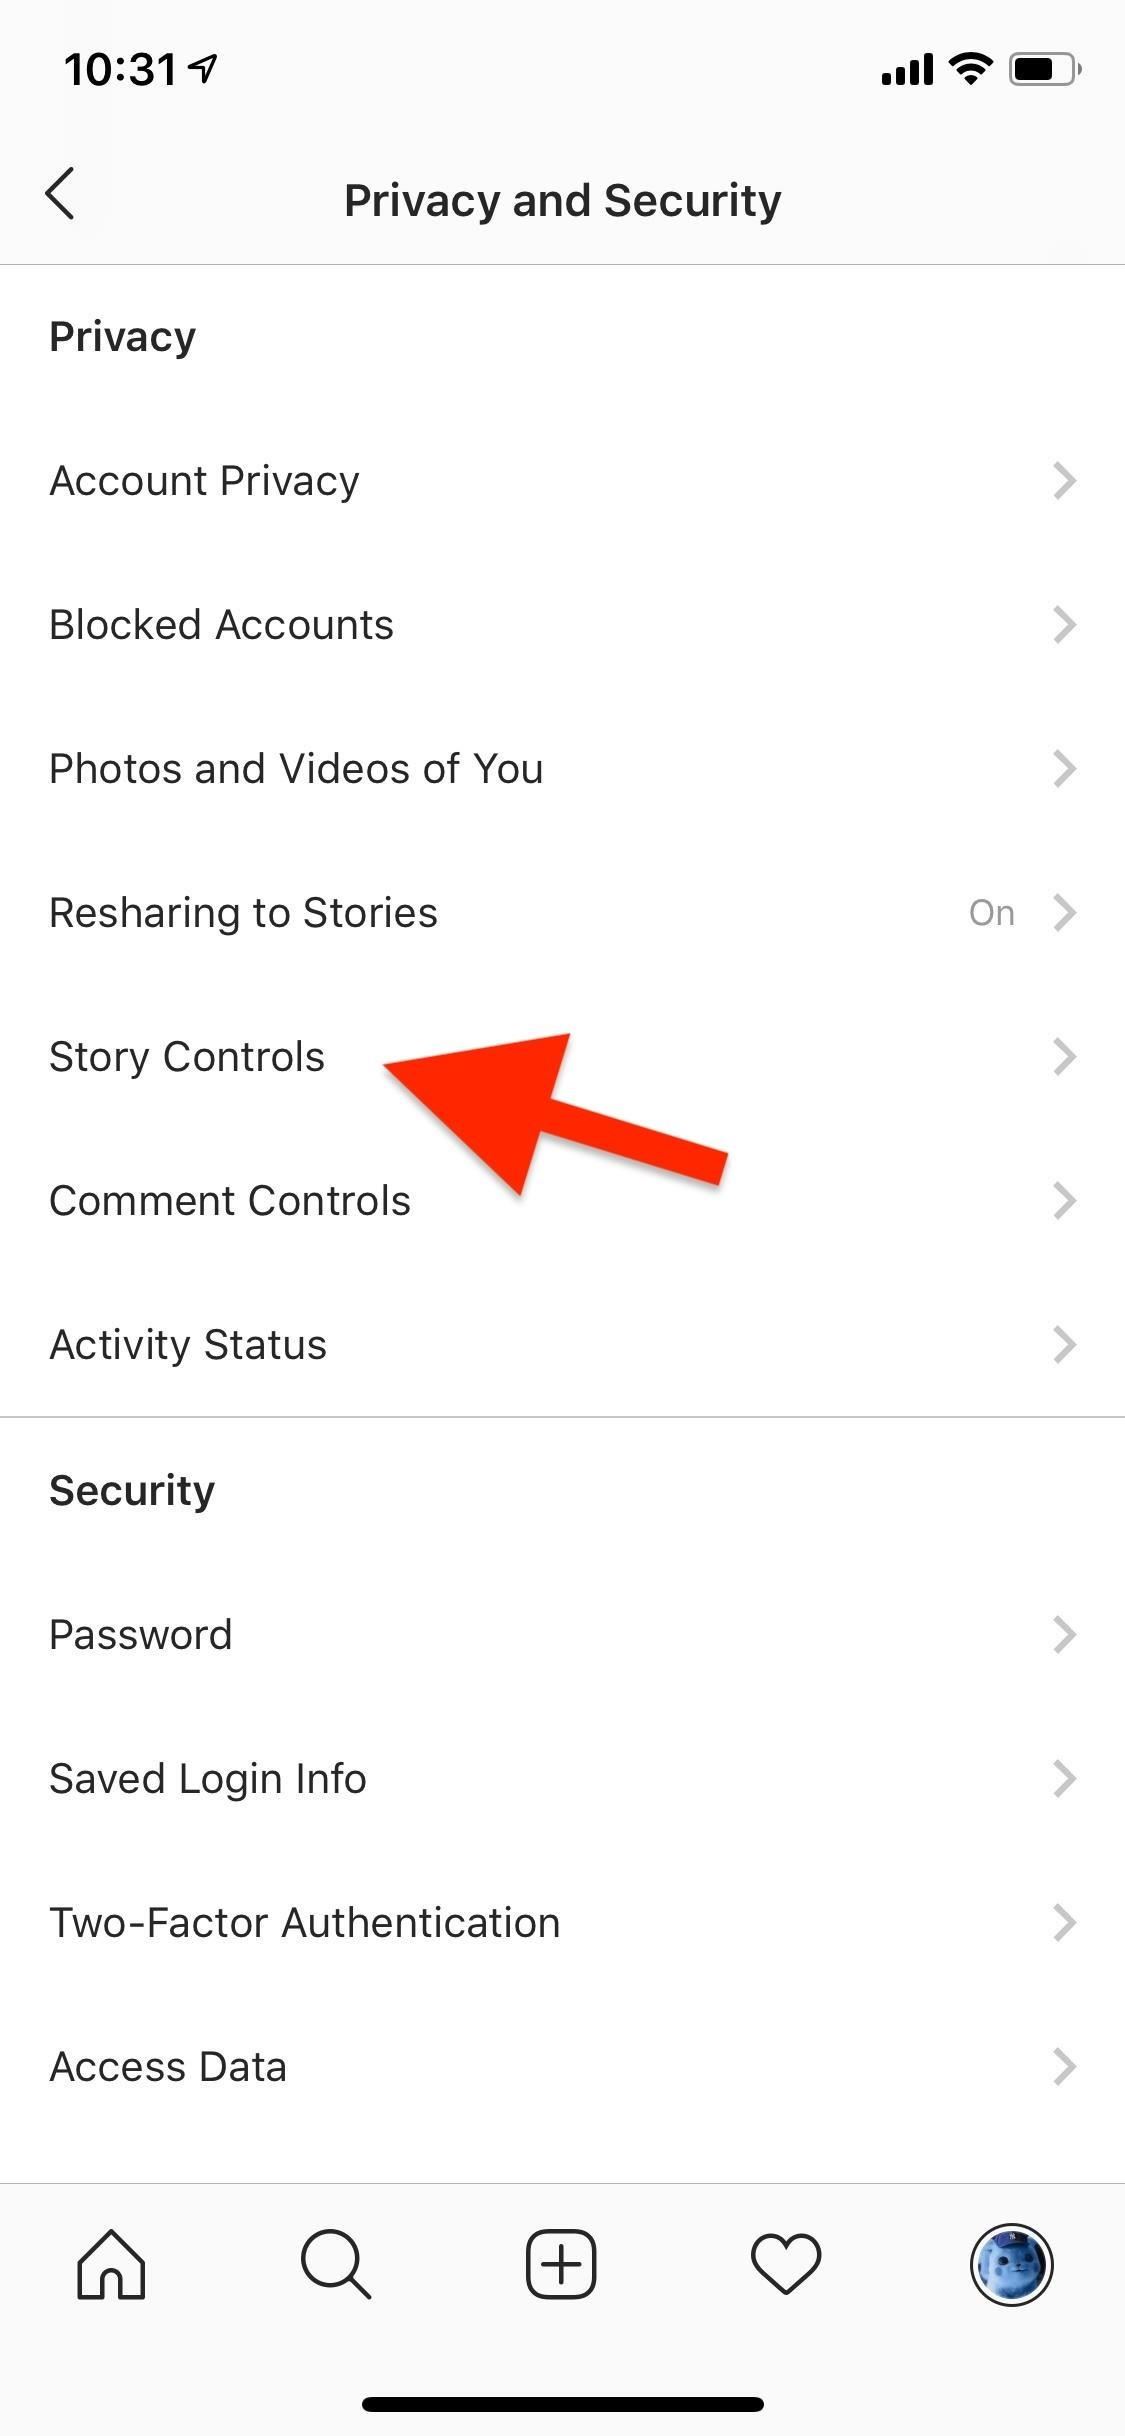 Stop Oversharing & Reduce Your Online Footprint with These 9 Instagram Privacy Tips